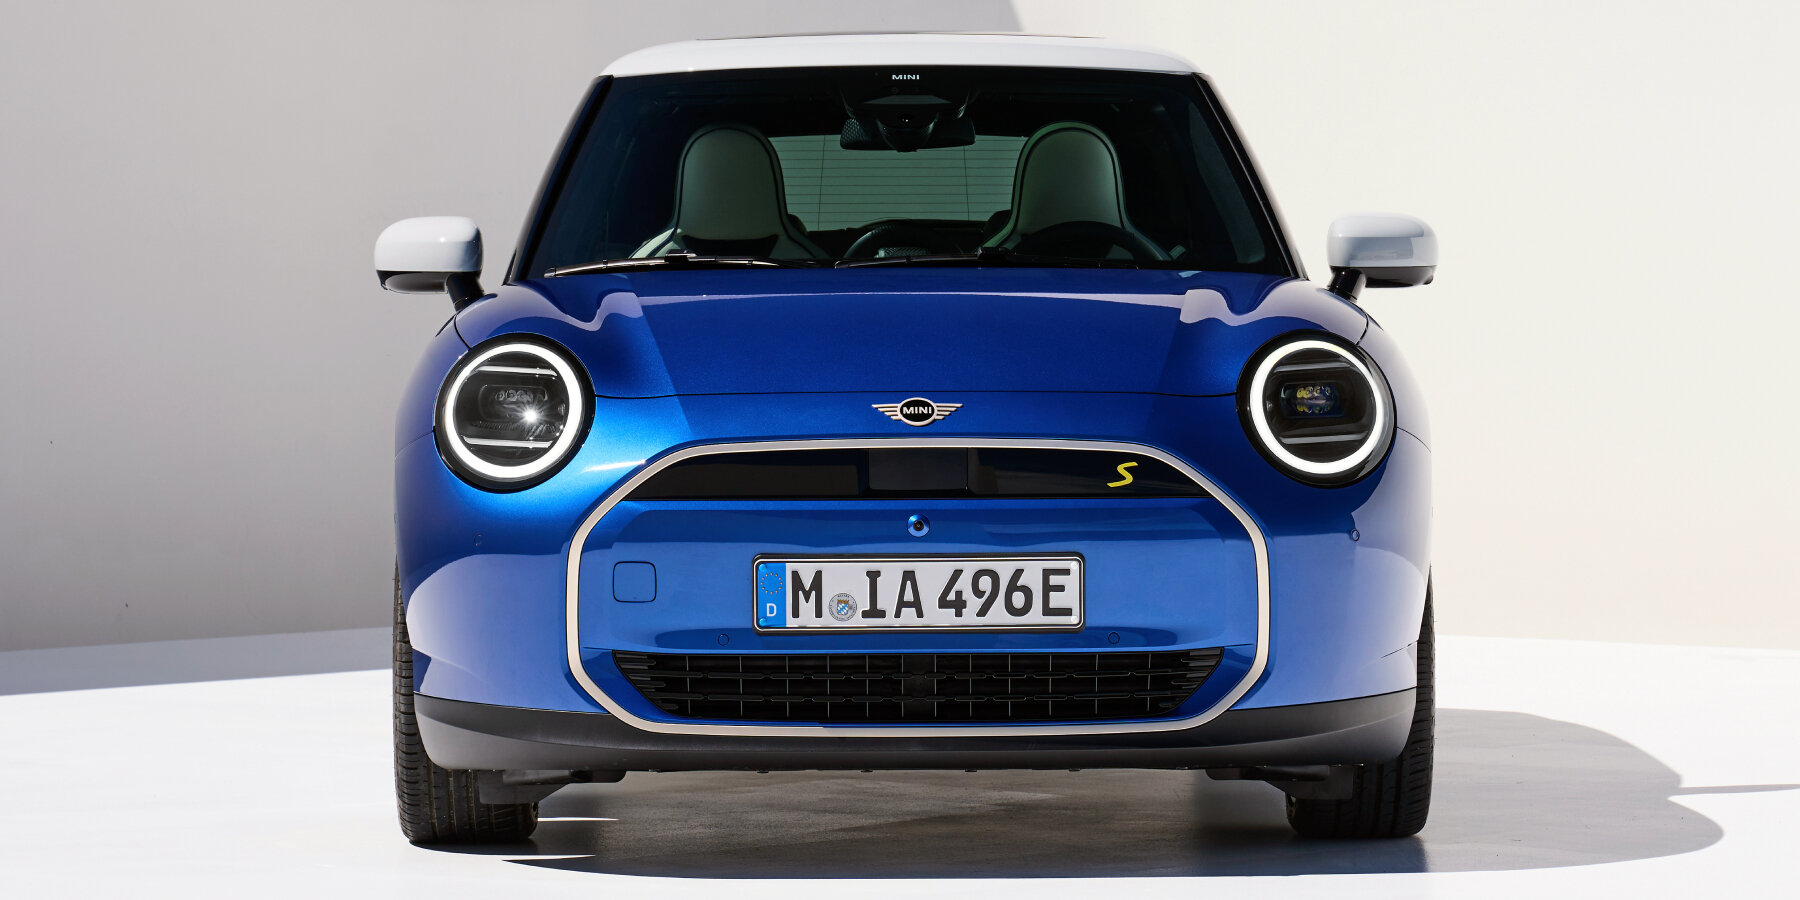 bon voyage, gearshift! MINI cooper gets resurrected as electric car ...